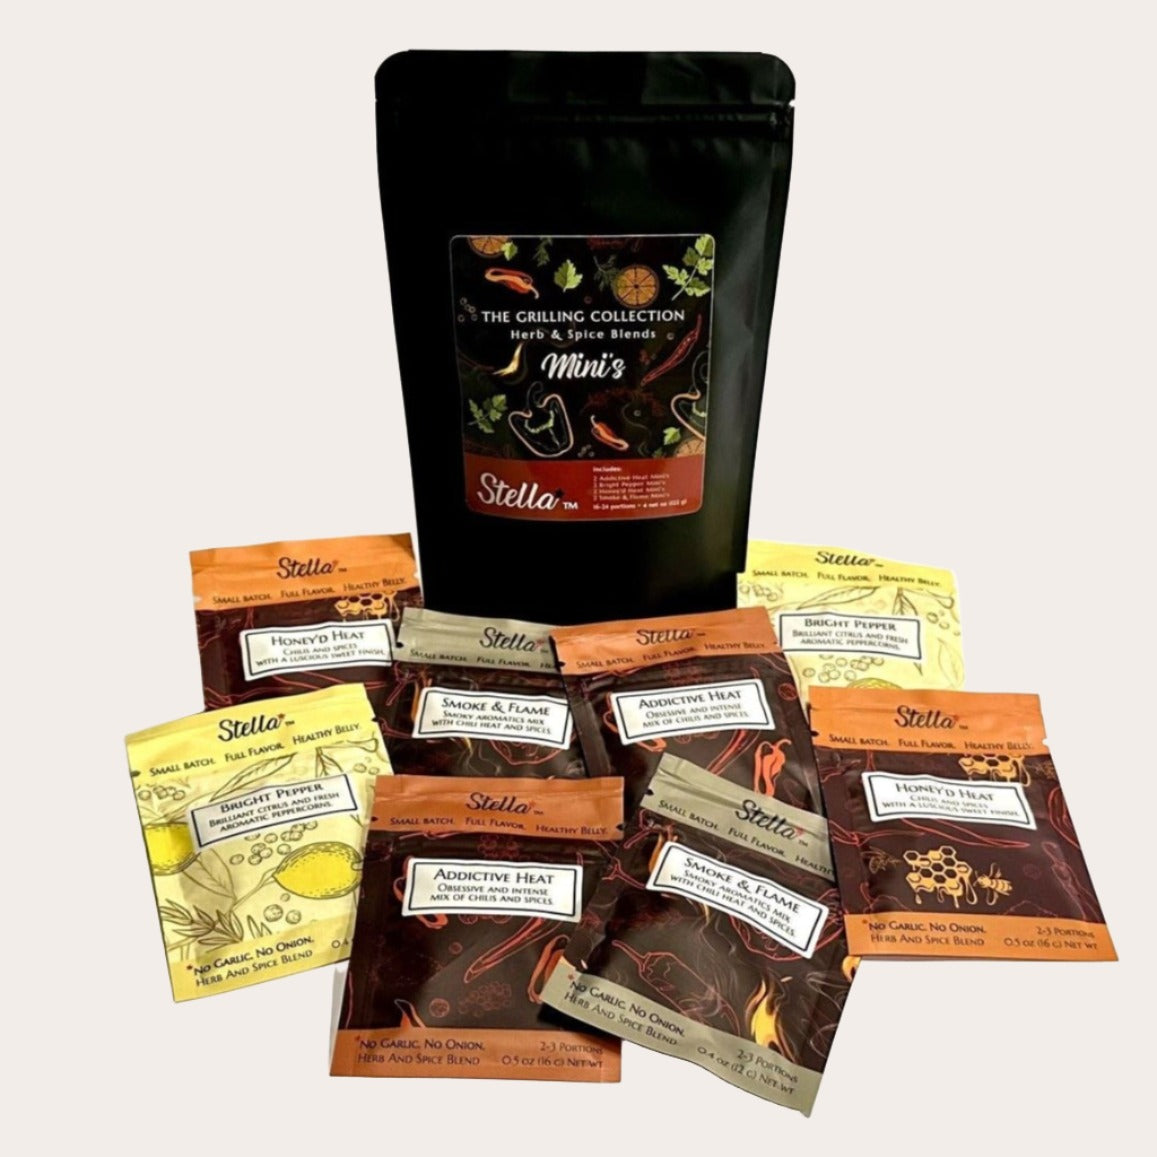 The Grilling Collection Min's Herb & Spice Blends by Stella Foods. The perfect gift set with two each of these four herb & spice blends for the popular grillmaster to try on just a few portions. These great sizes are also perfect to take on vacation or on the road. Low FODMAP. No garlic. No onions. The Grilling Collection Mini's includes Bright Pepper, Addictive Heat, Honey'd Heat and Smoke & Flame.